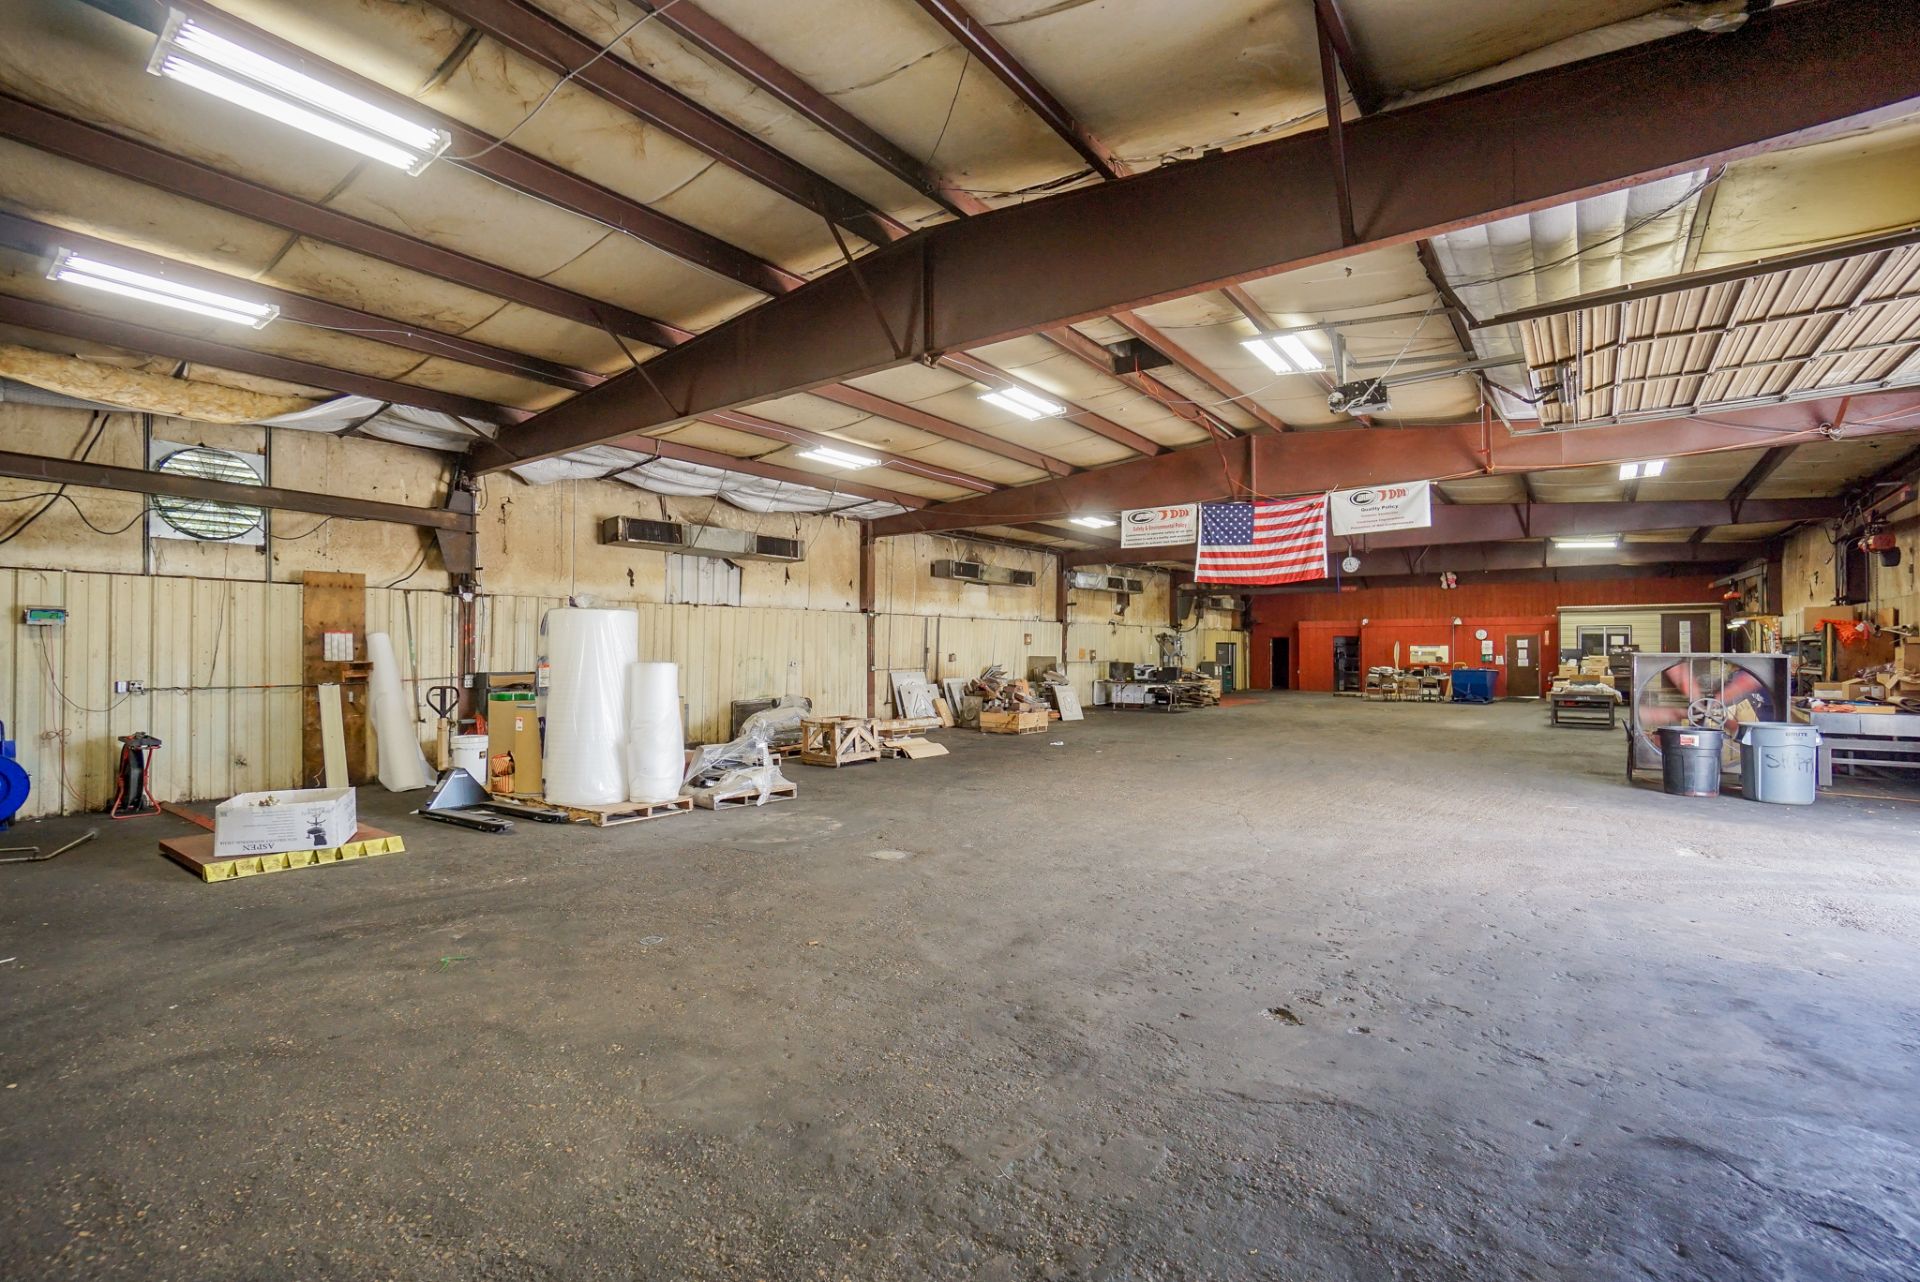 Industrial/Commercial Property on Hardy Toll Road in Houston, TX - Image 14 of 44